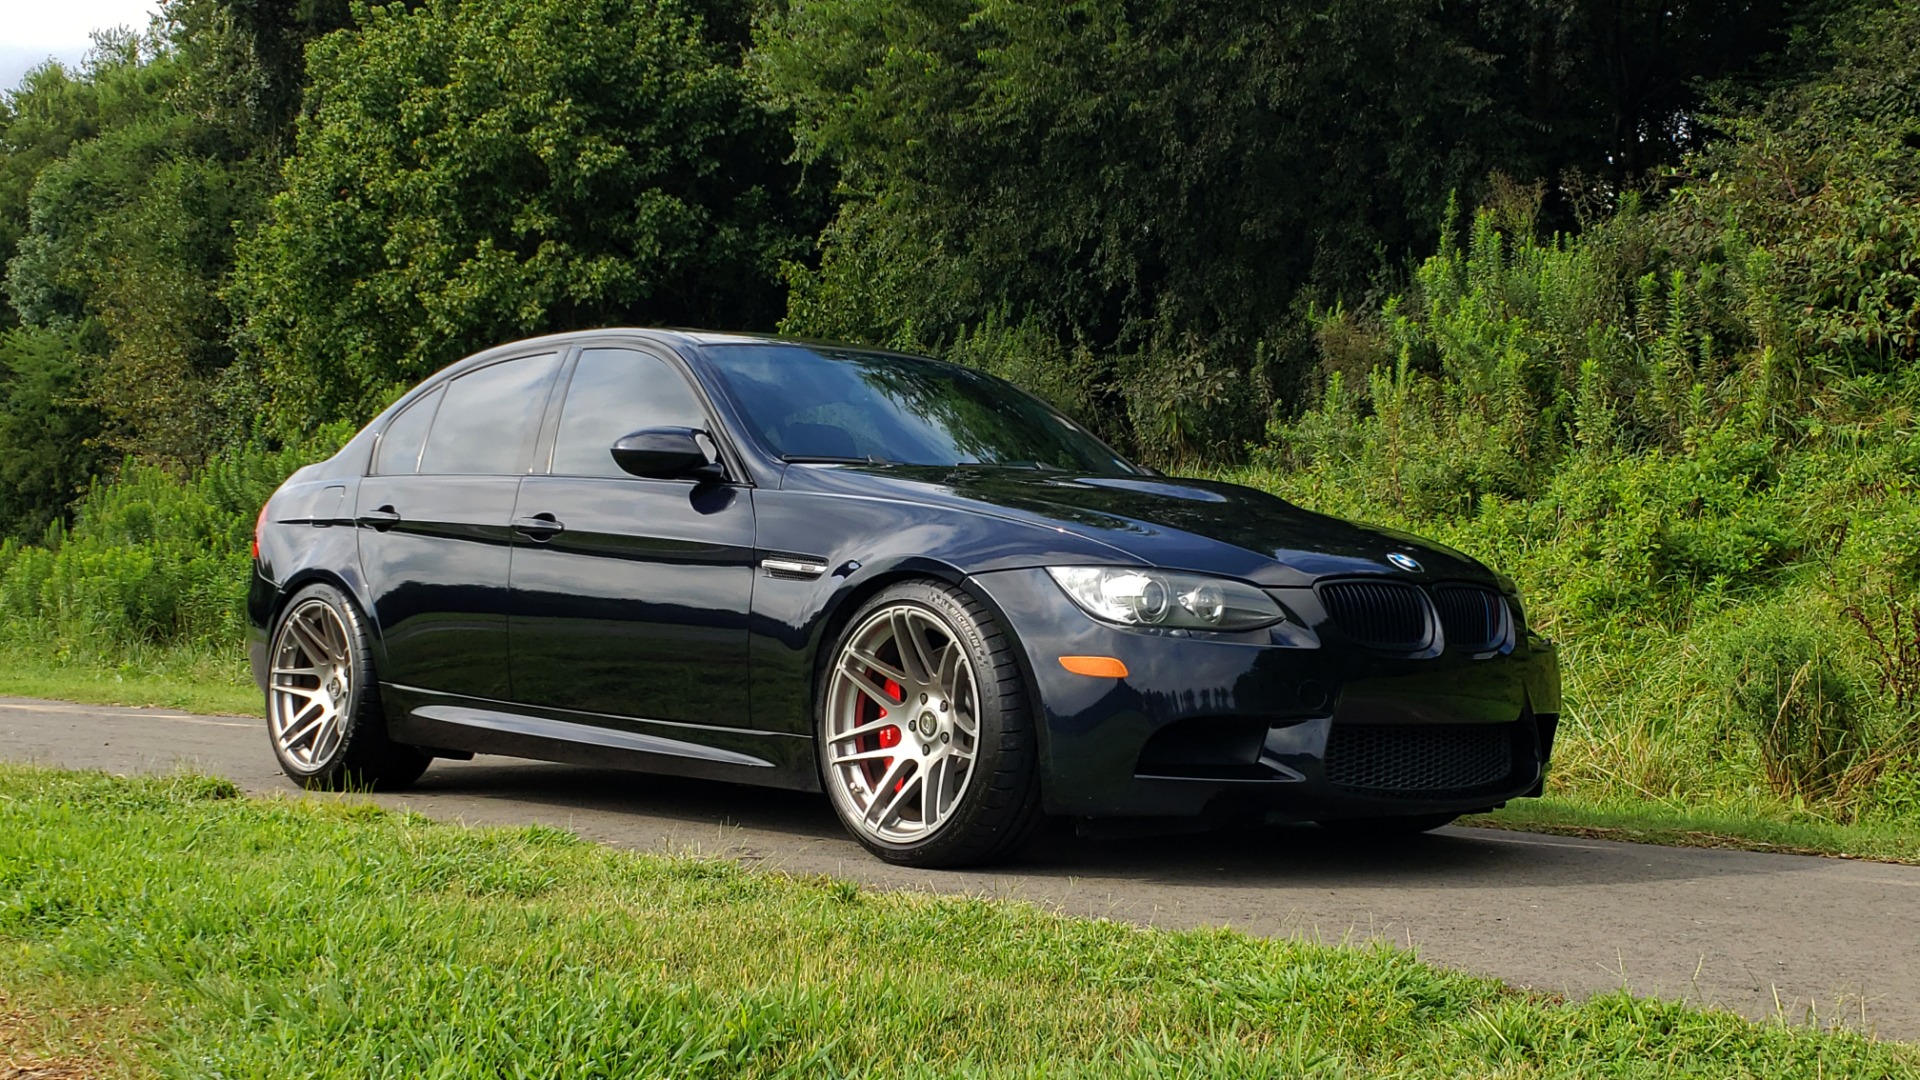 Used 2008 BMW 3 SERIES M3 PREMIUM / TECH / PDC / SUNROOF / 4.0L V8 / 6-SPD MANUAL for sale Sold at Formula Imports in Charlotte NC 28227 10